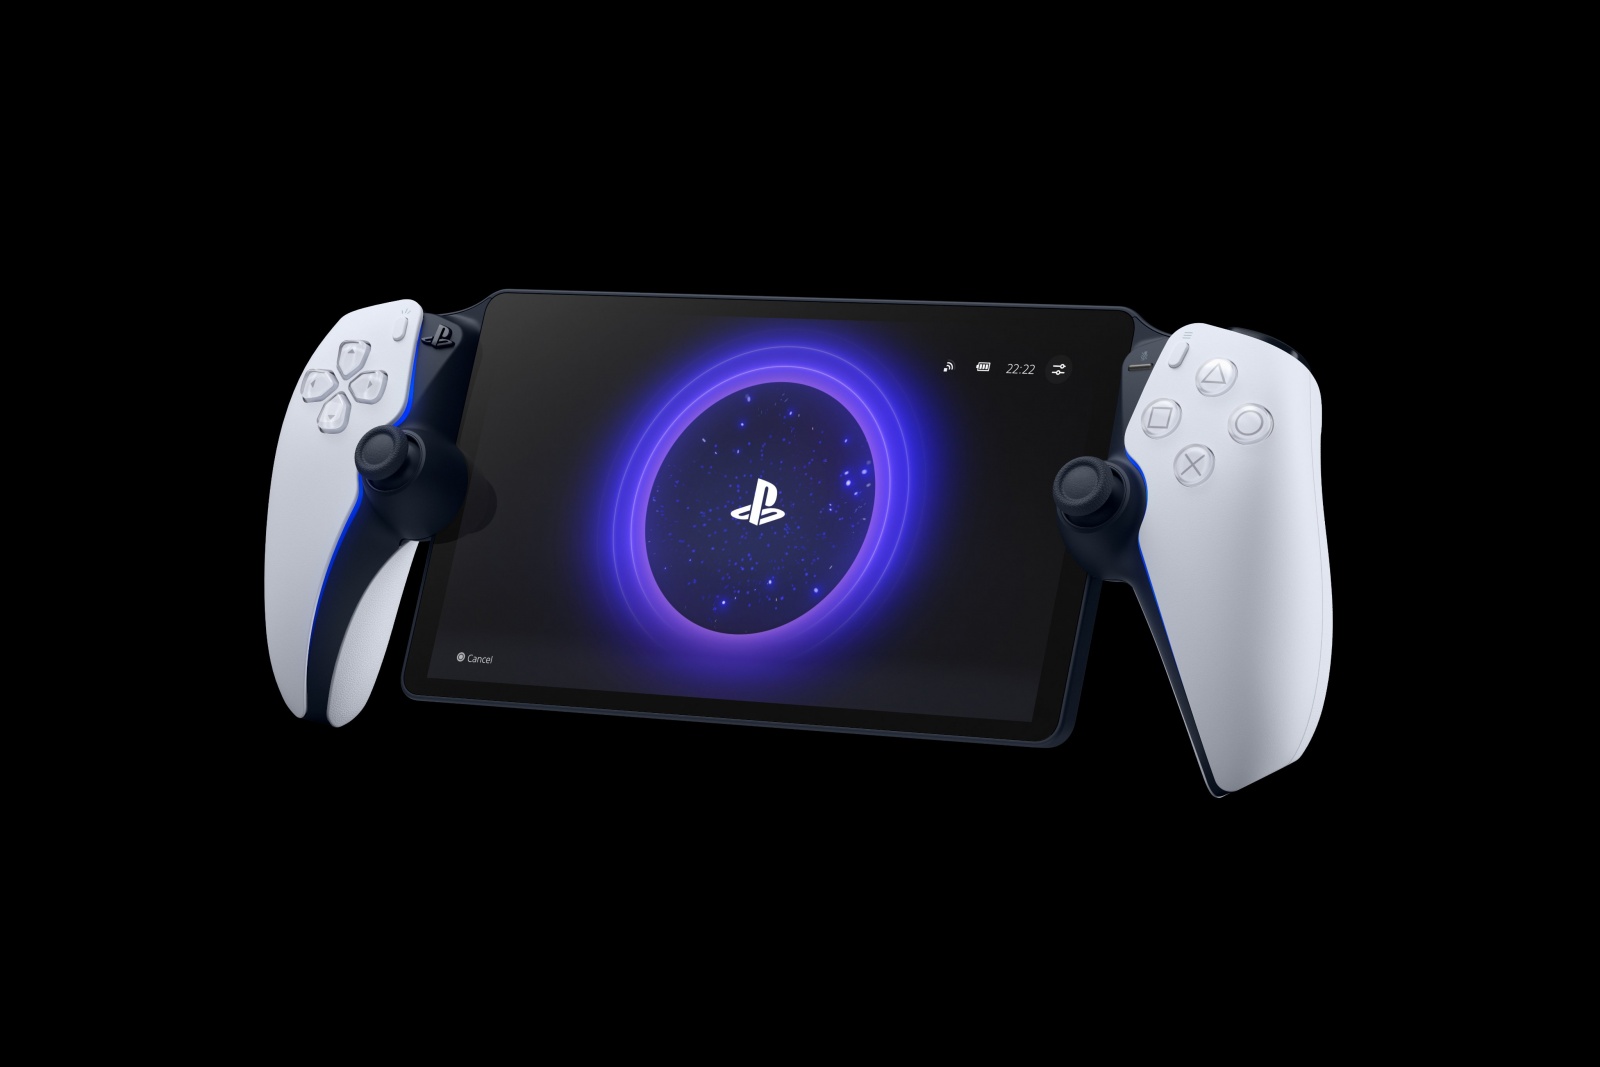 images./images/Sony-PlayStation-5-PS5-Di